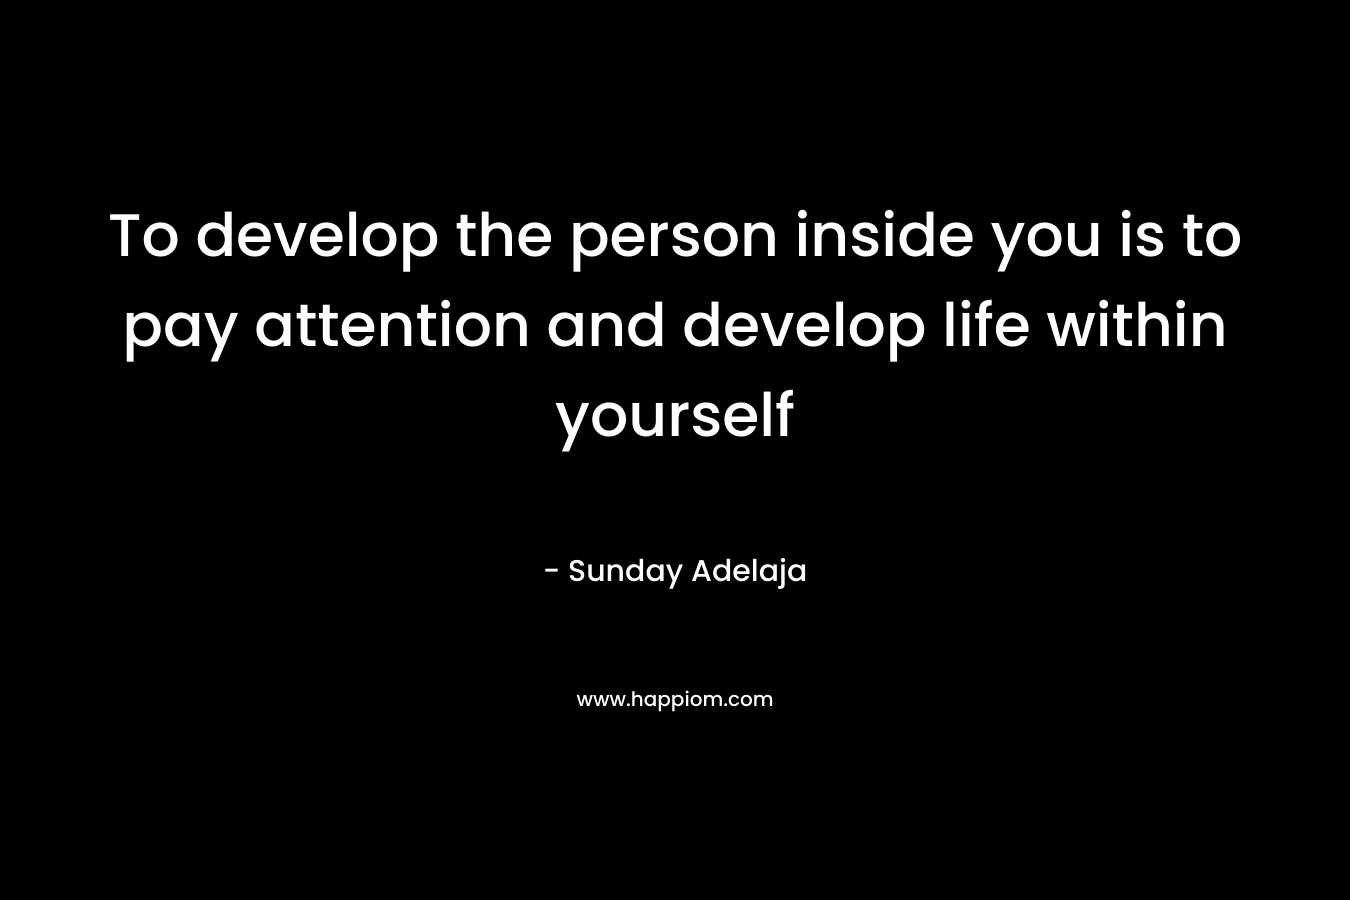 To develop the person inside you is to pay attention and develop life within yourself